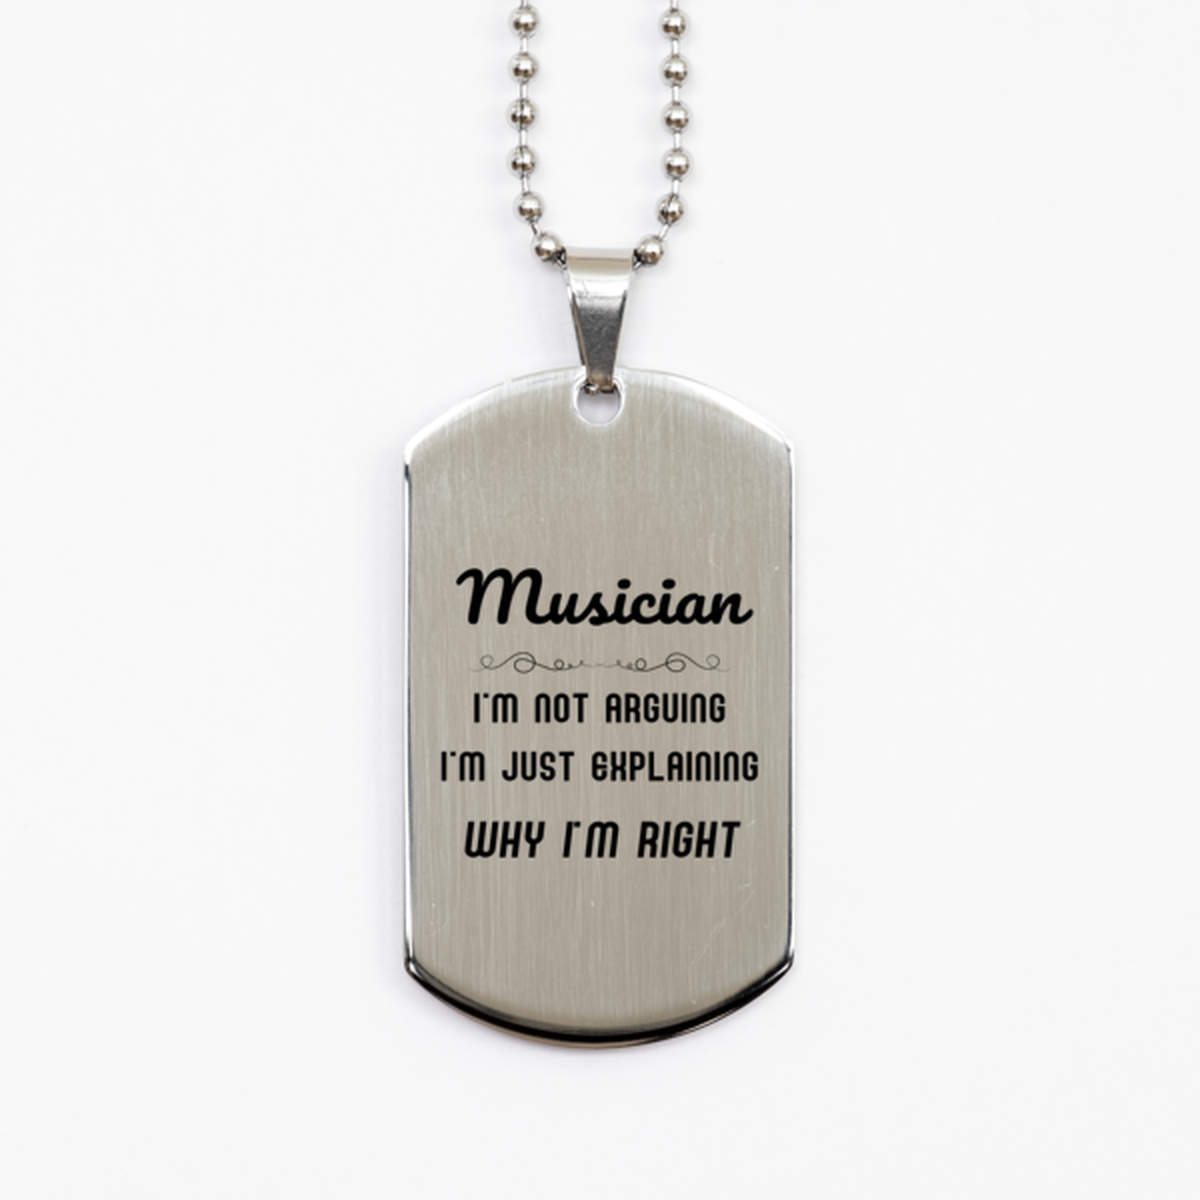 Musician I'm not Arguing. I'm Just Explaining Why I'm RIGHT Silver Dog Tag, Funny Saying Quote Musician Gifts For Musician Graduation Birthday Christmas Gifts for Men Women Coworker